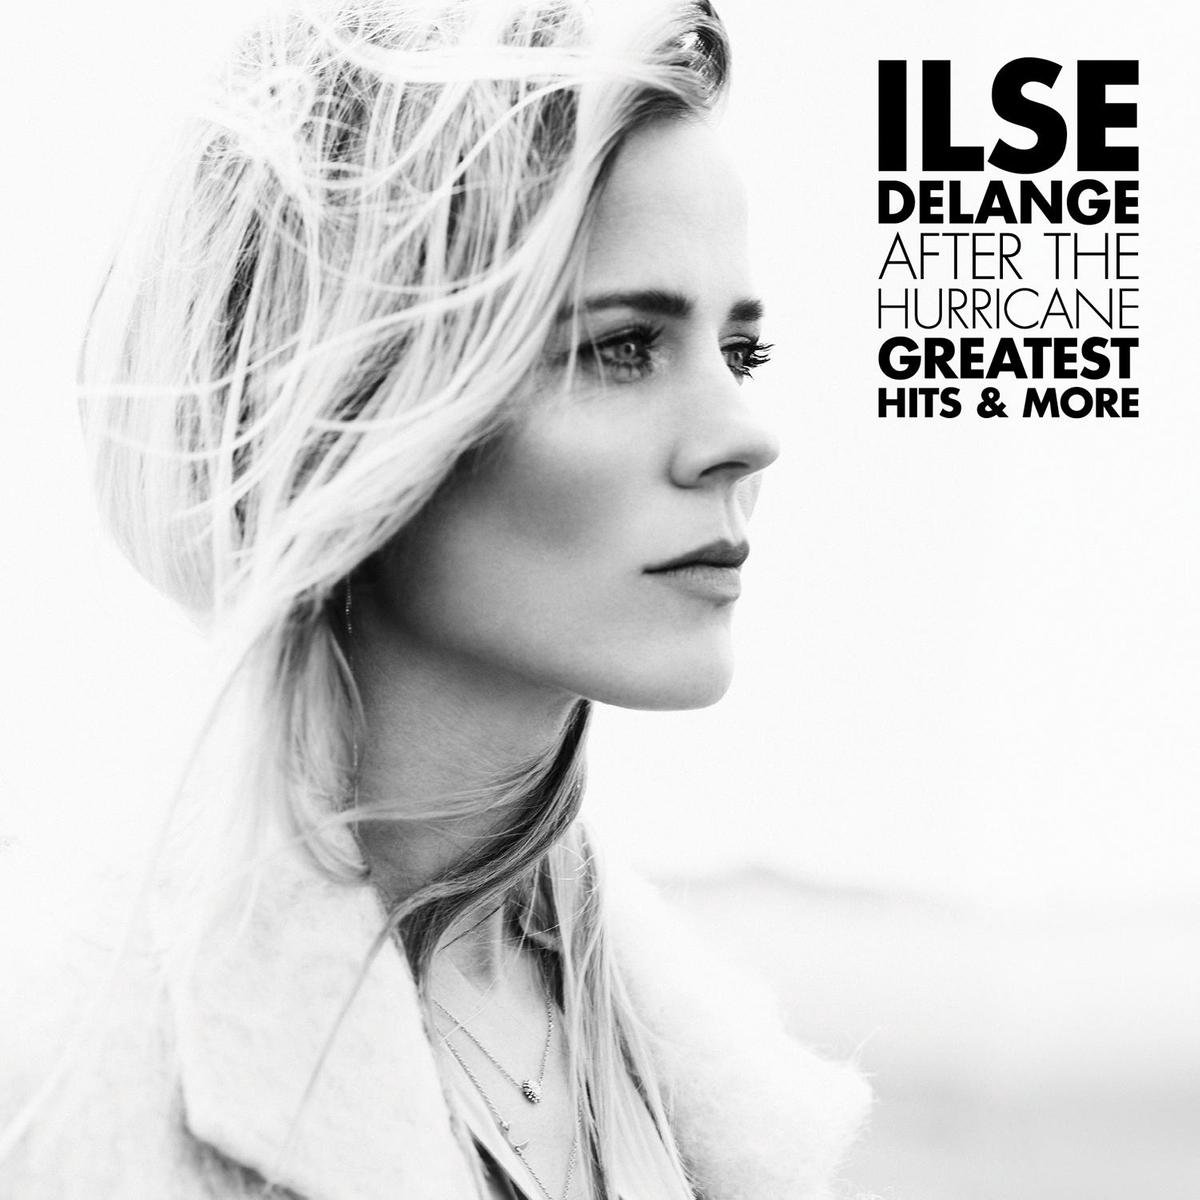 After the Hurricane - Greatest Hits - Ilse DeLange